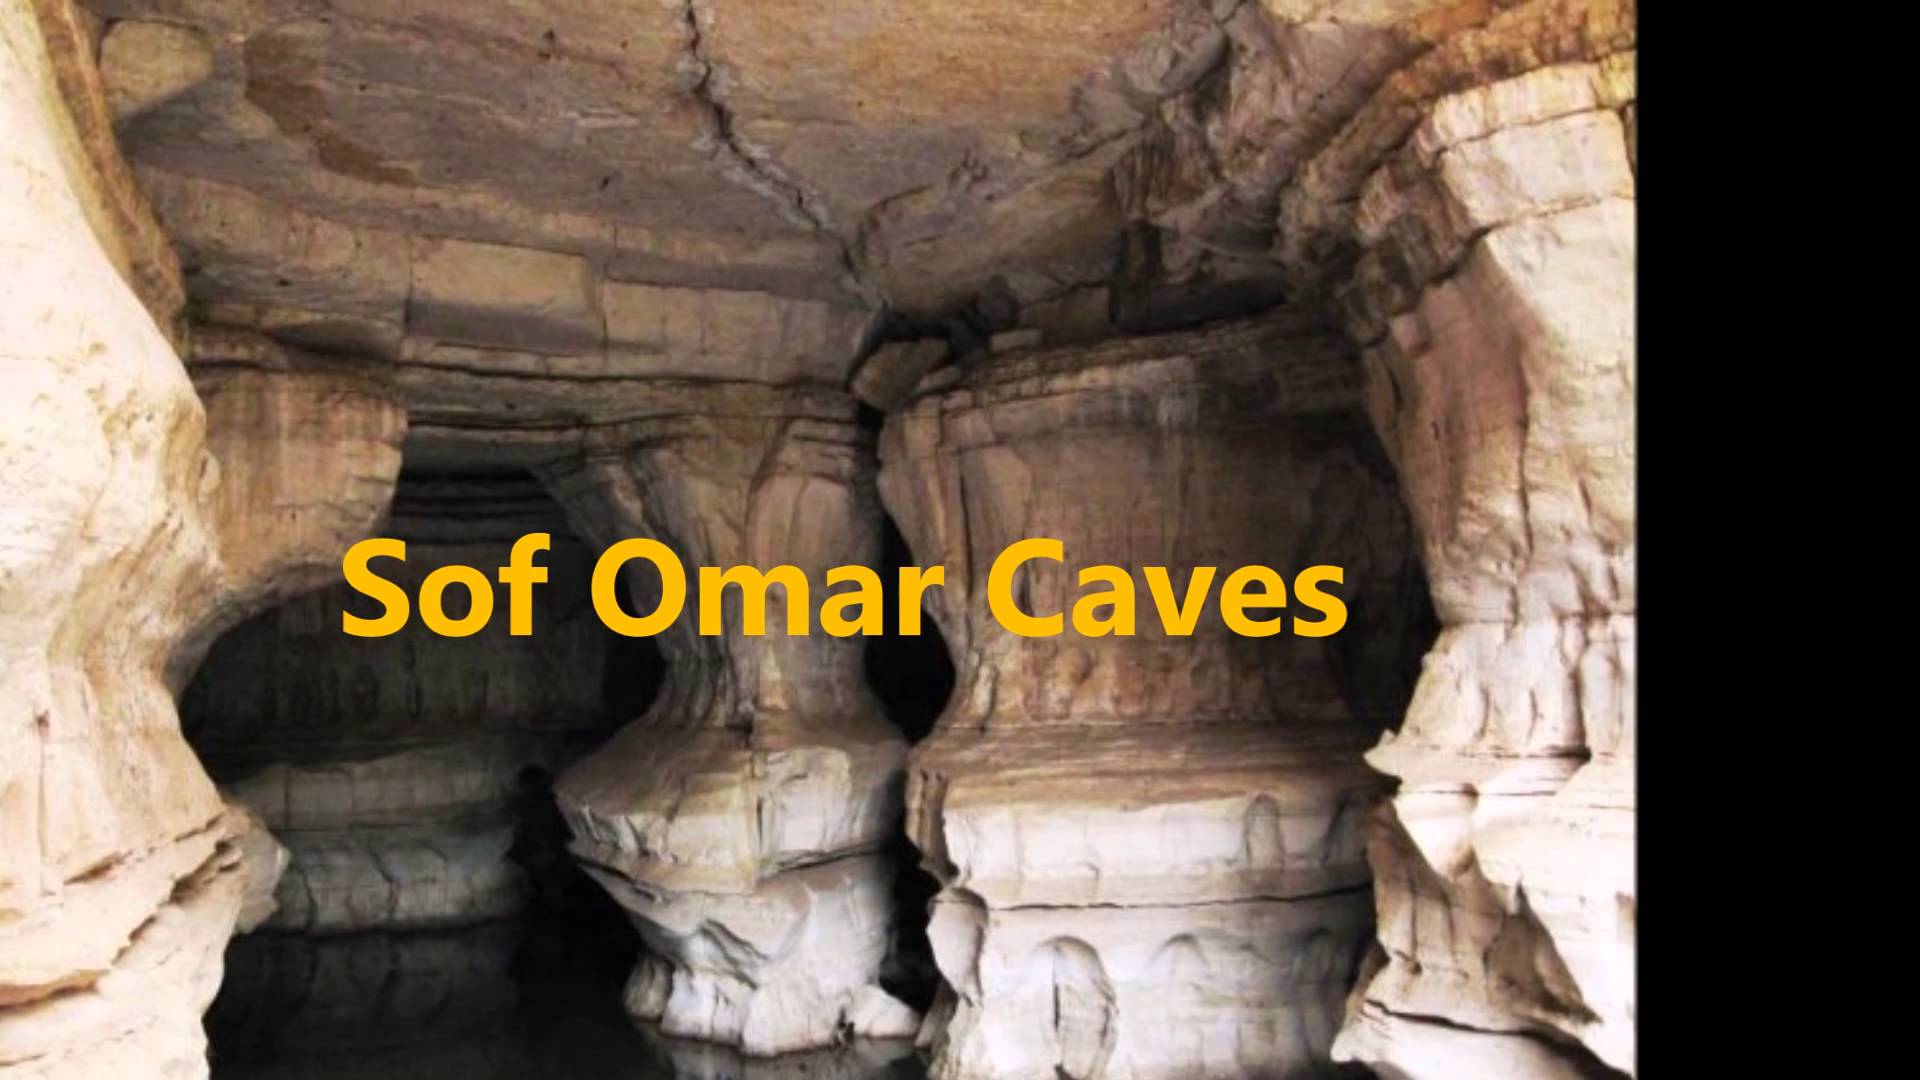 Sof Omar Caves Backgrounds, Compatible - PC, Mobile, Gadgets| 1920x1080 px